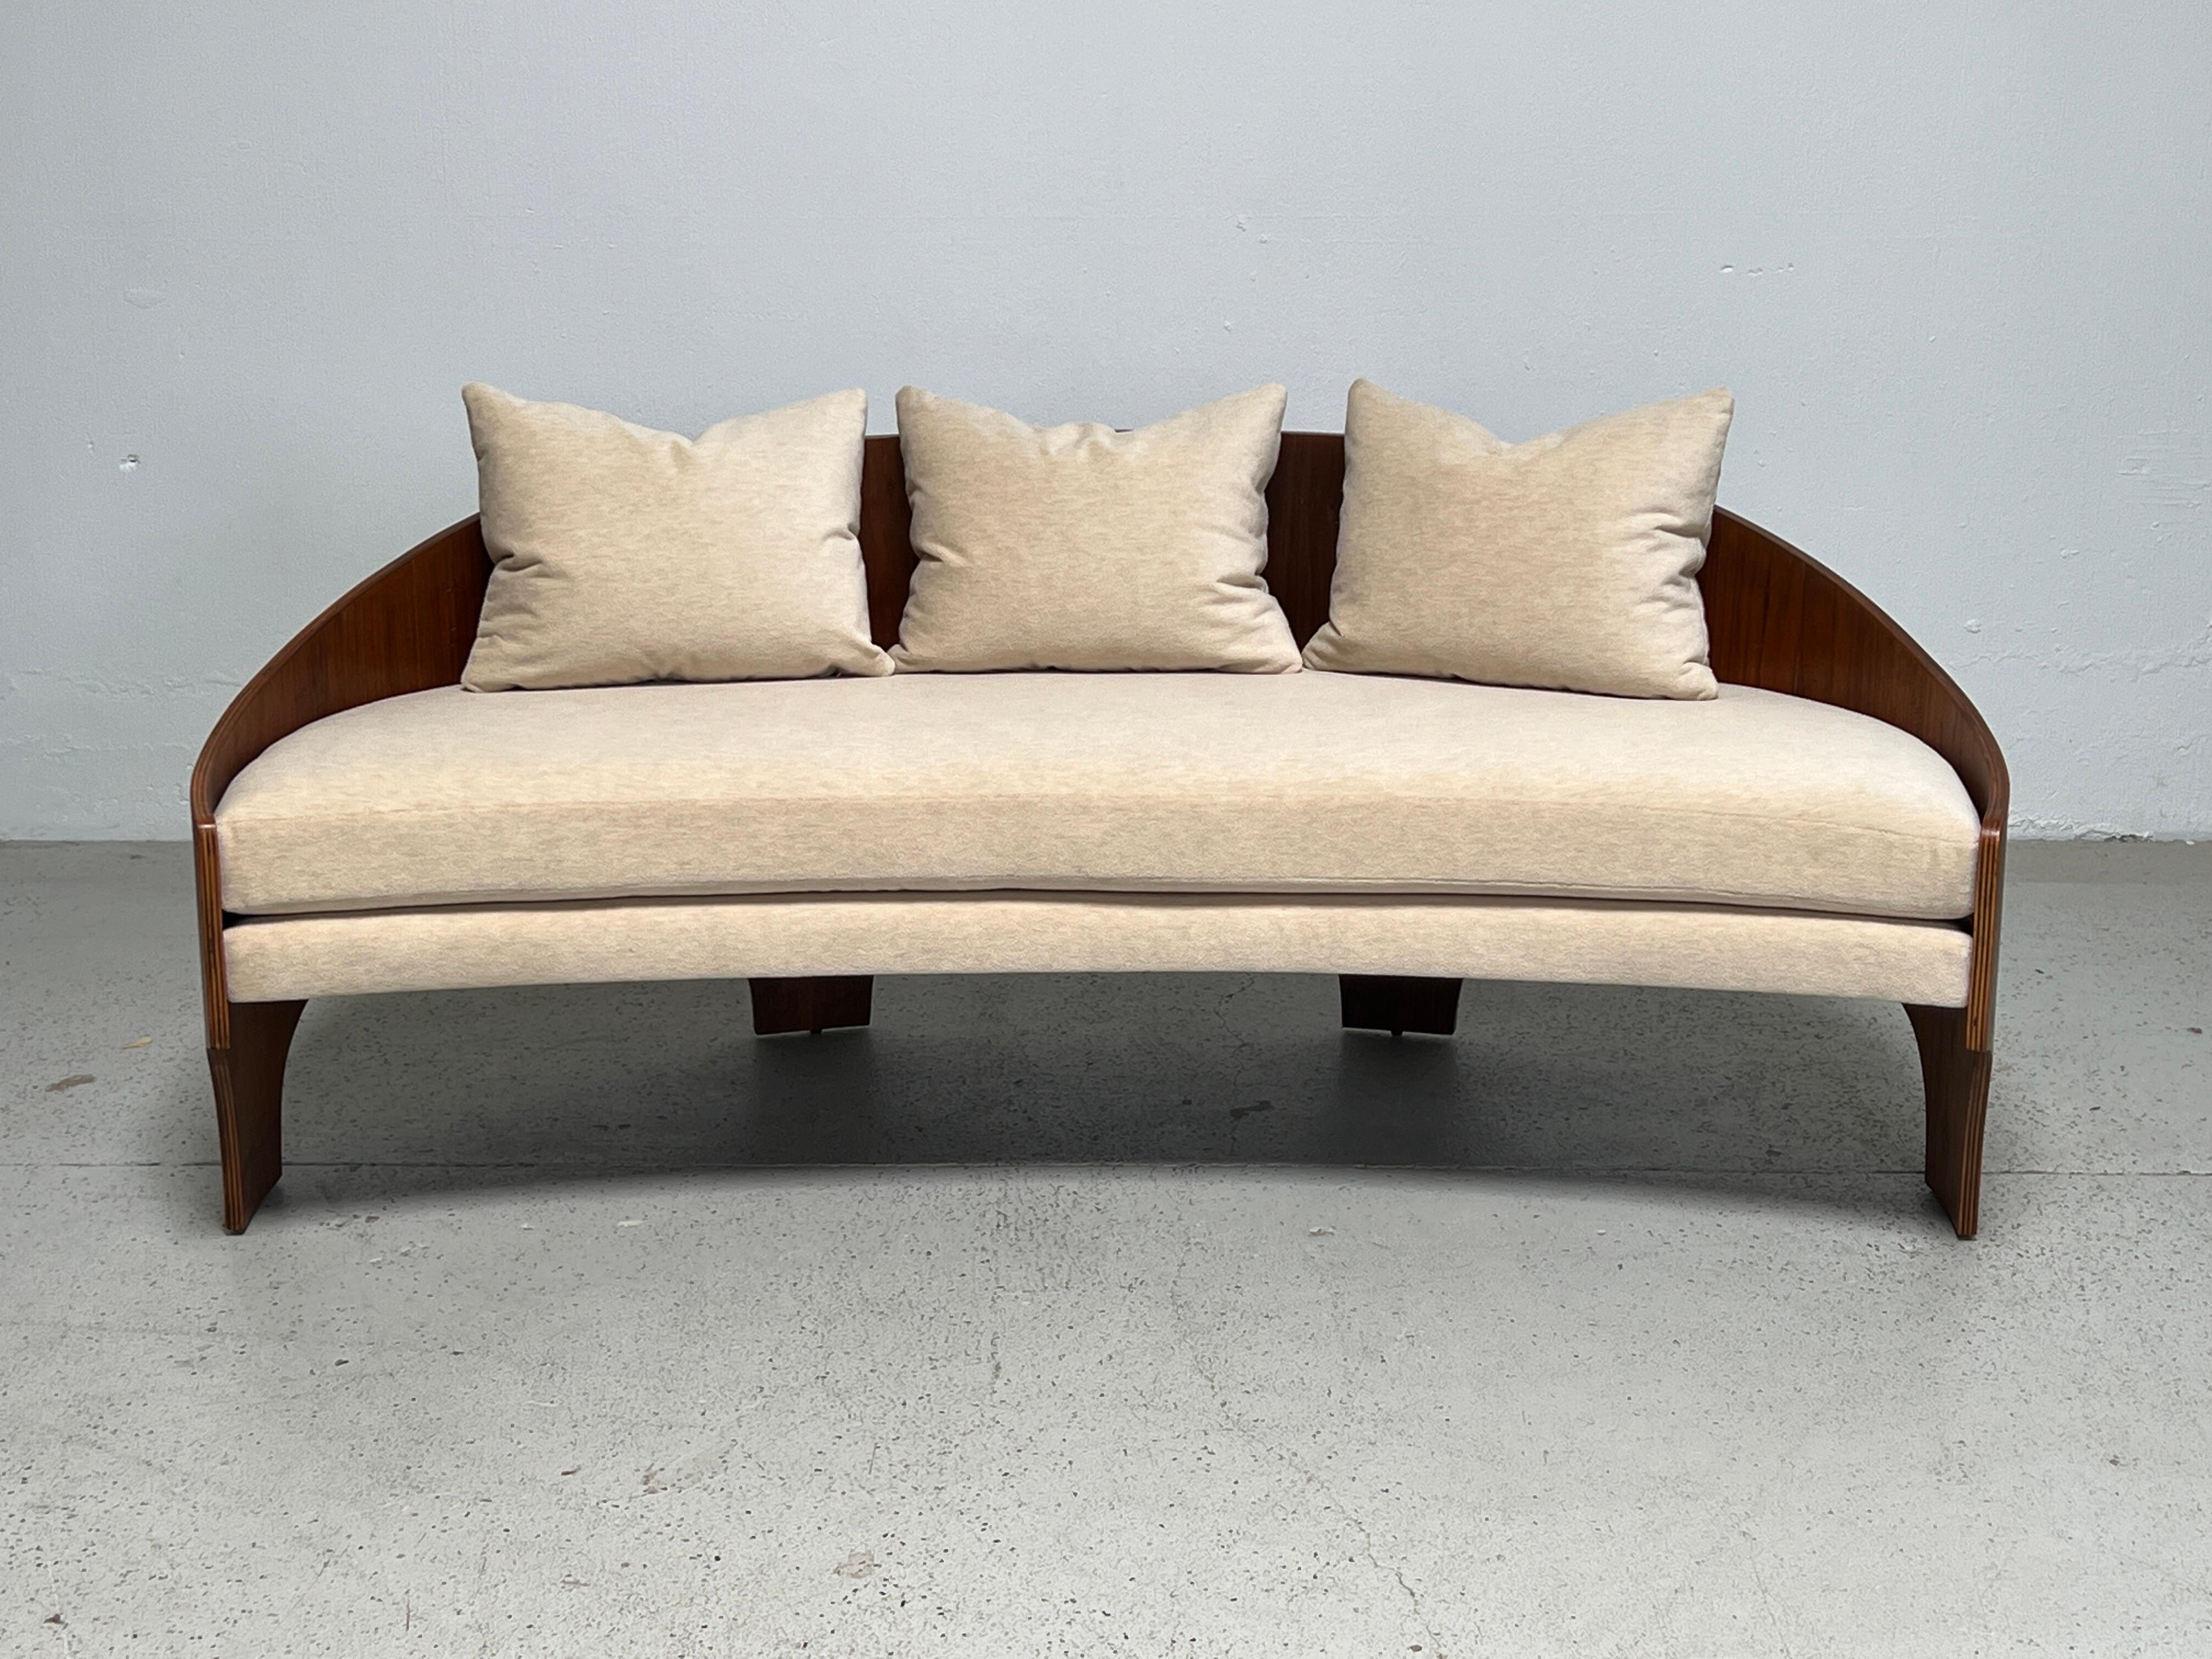 Henry Glass 'Intimate Island' Sofa in Walnut In Good Condition For Sale In Dallas, TX